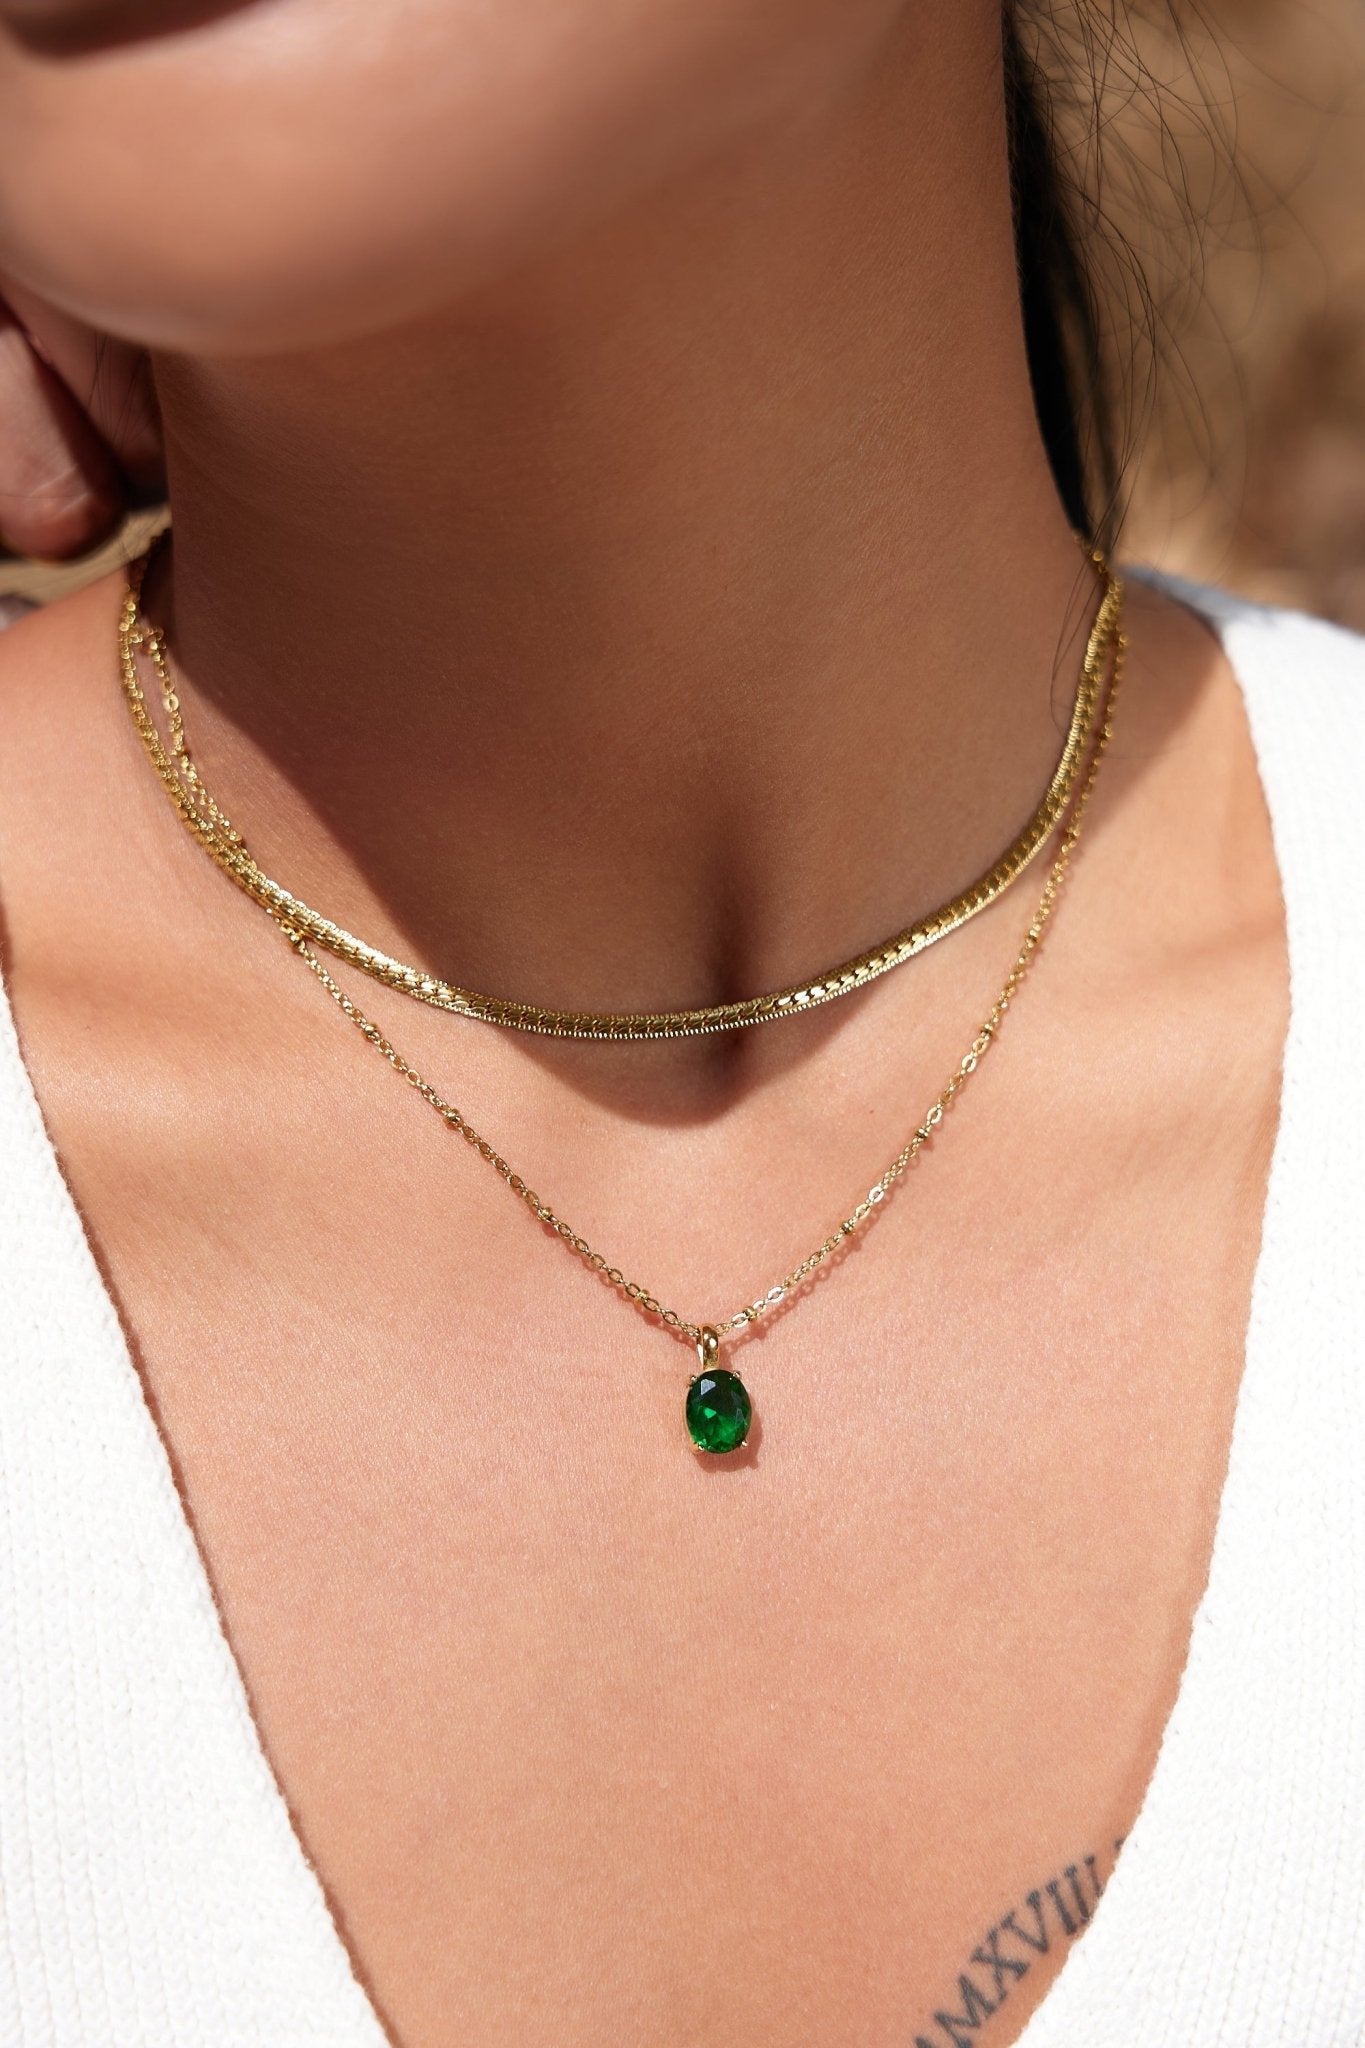 Oval Gem Necklace in Green - Flaire & Co.